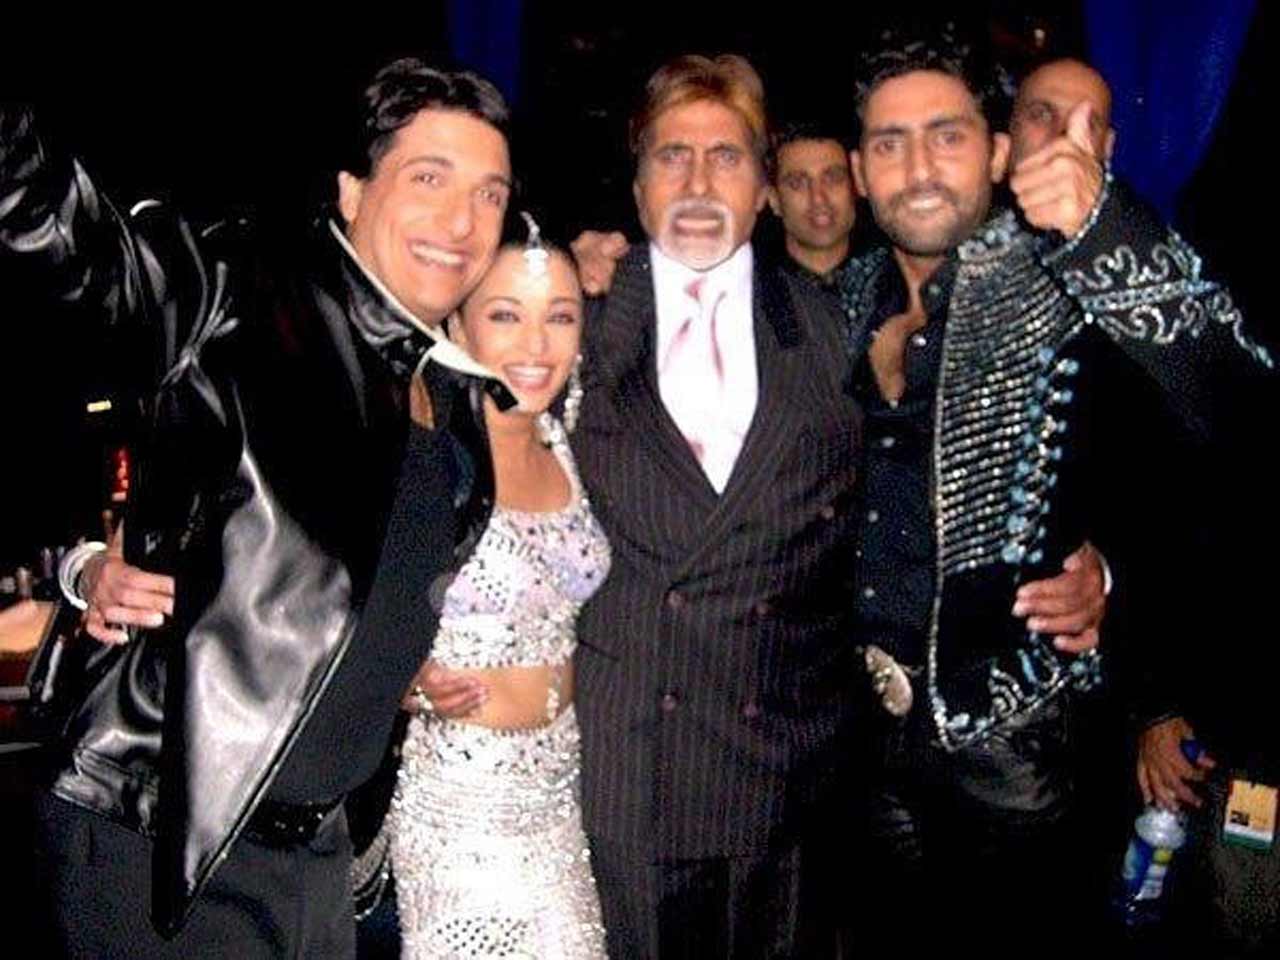 Aishwarya Rai Bachchan and Abhishek Bachchan with Shiyamak Davar and Amitabh Bachchan at one of their performances. The happy group posed for a picture at the backstage.